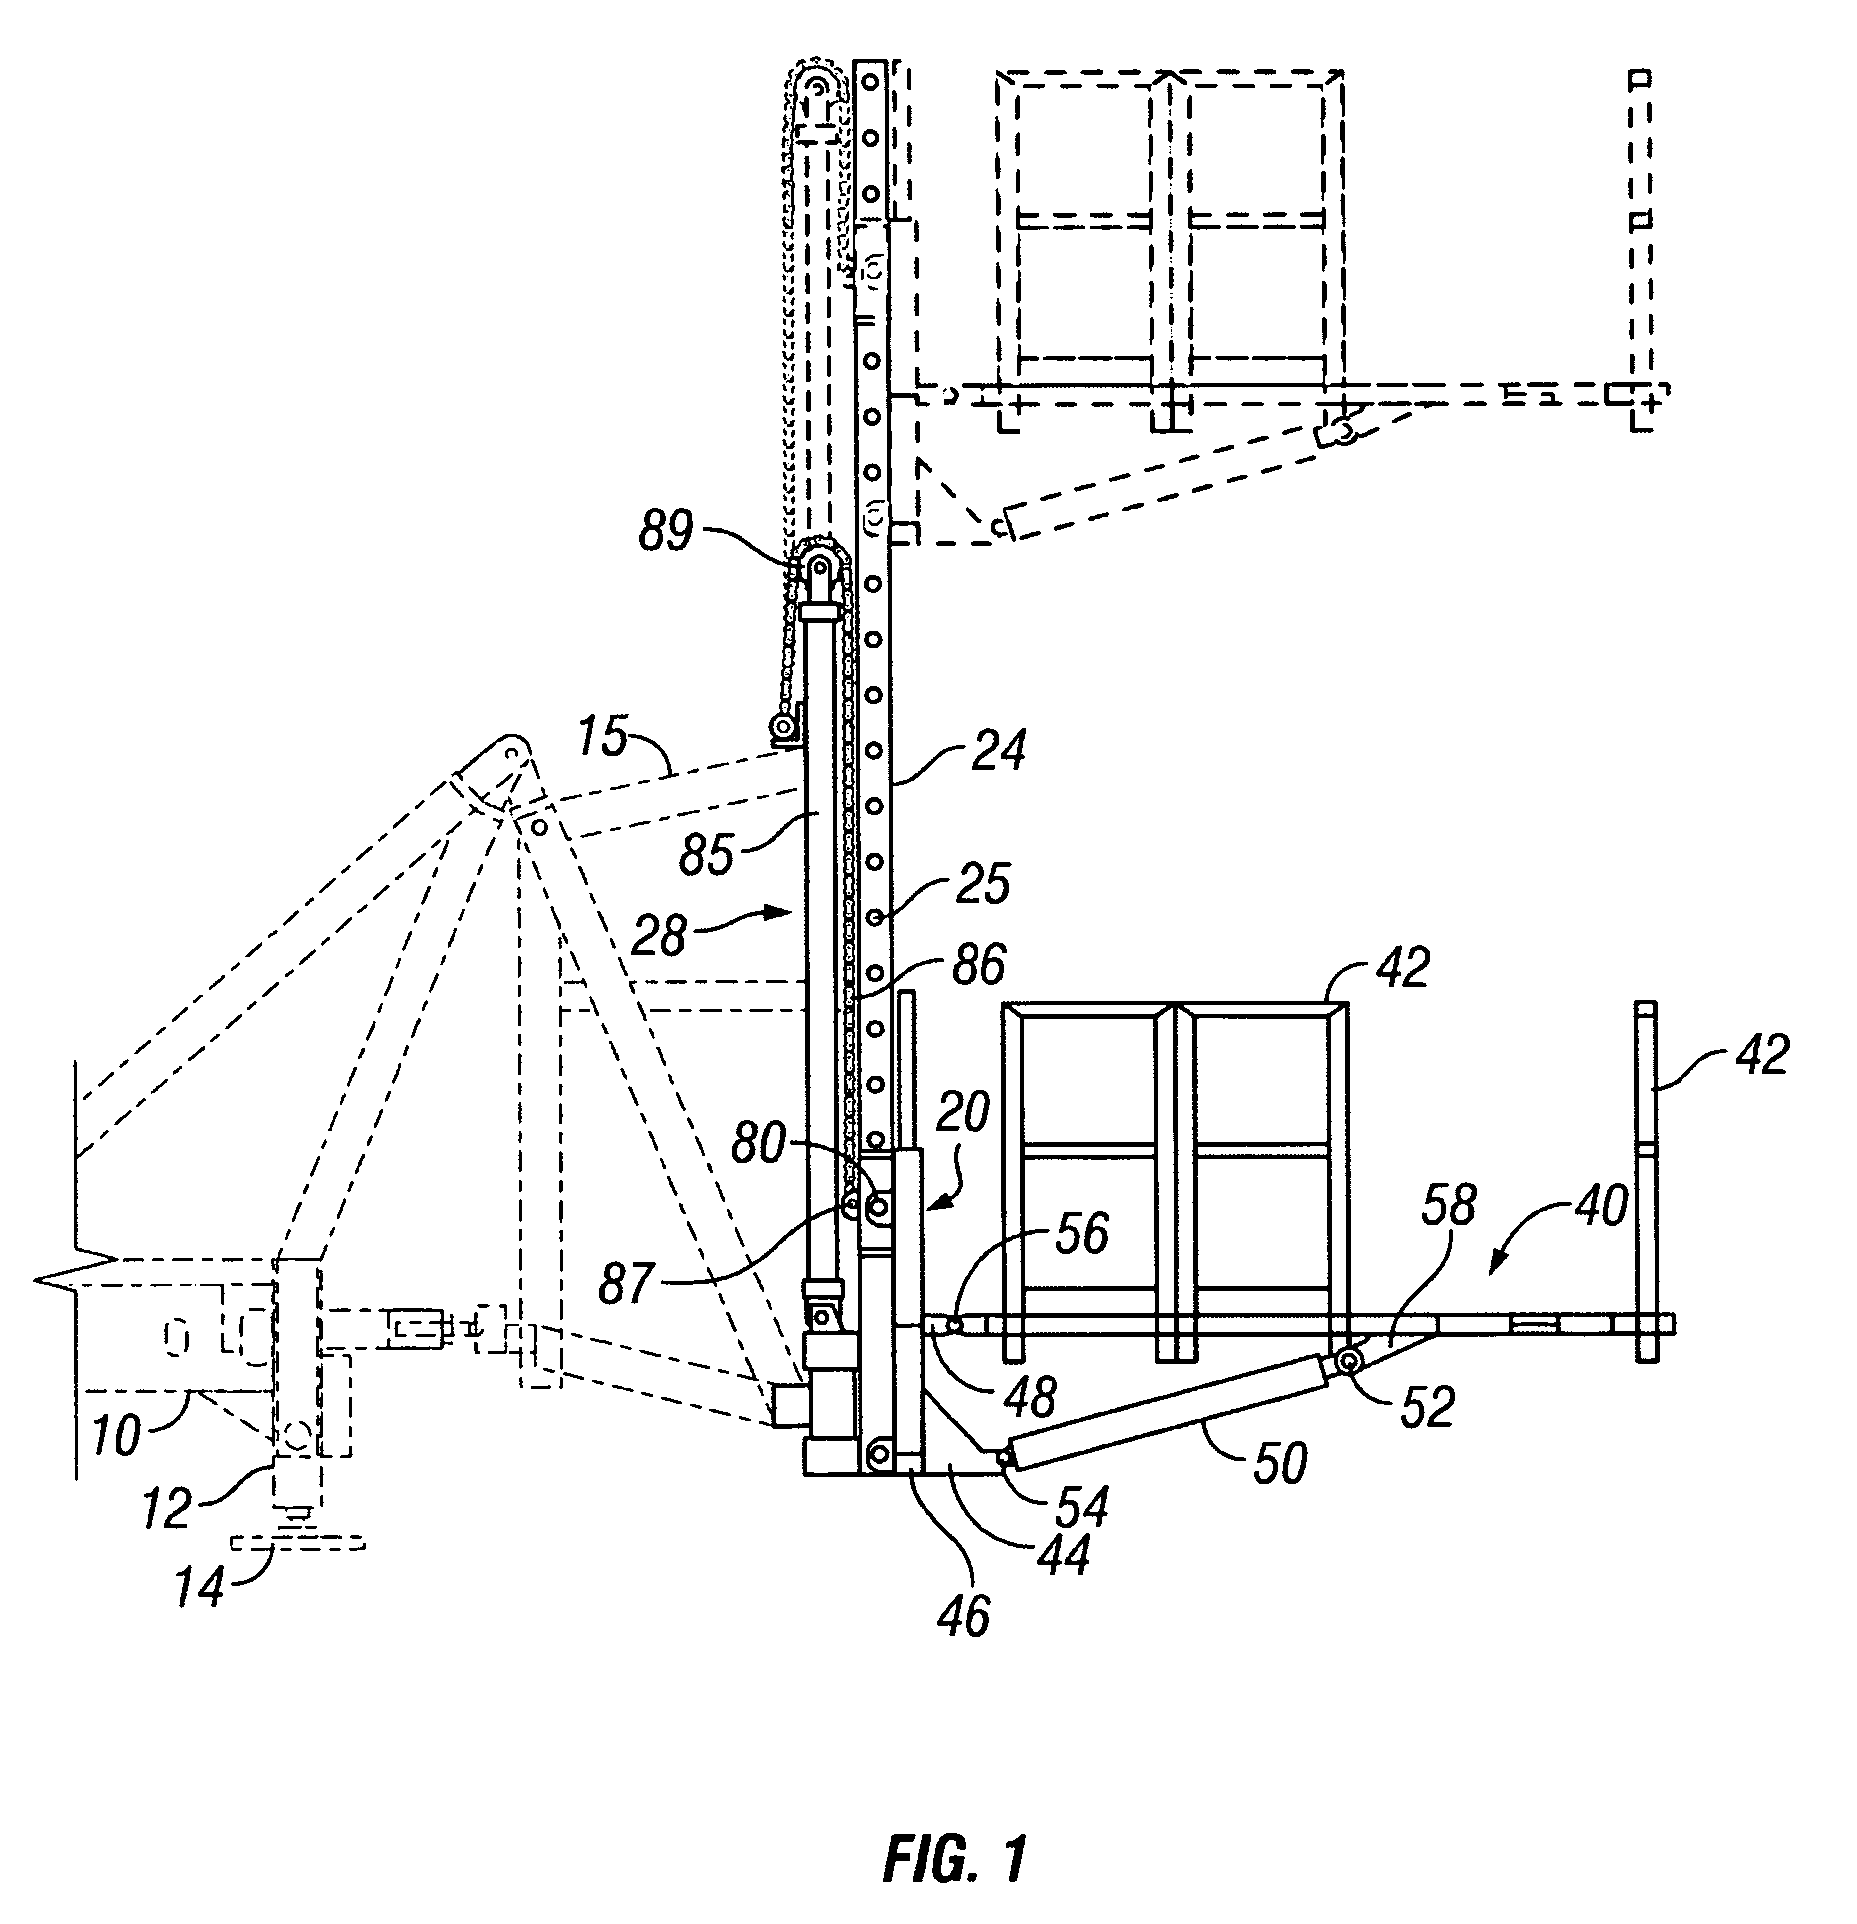 Automated system for positioning and supporting the work platform of a mobile workover and well-servicing rig